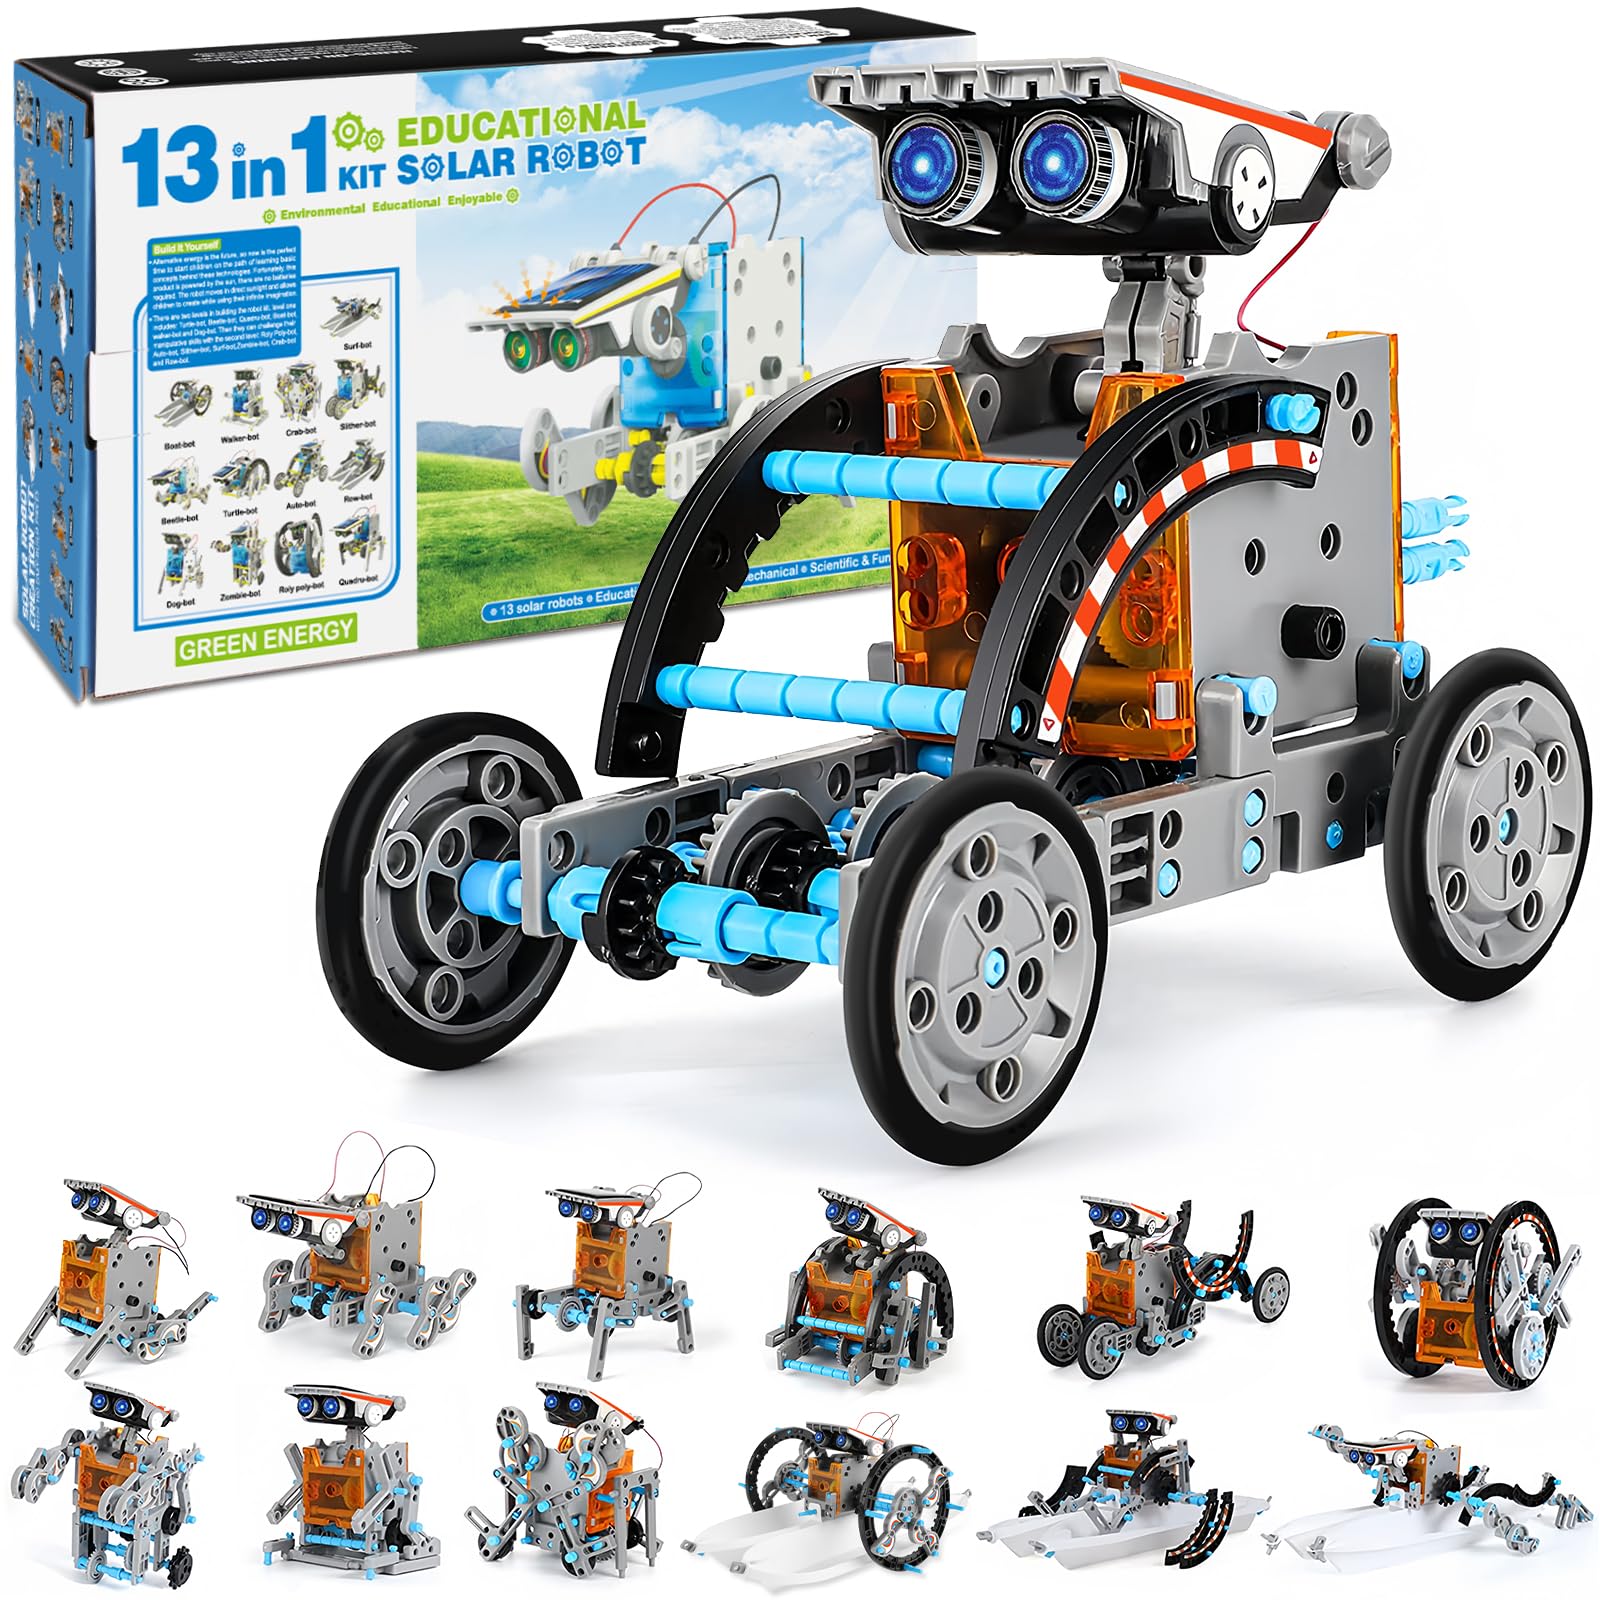 Playsheek 13-in-1 STEM Projects Solar Robot Toy for Kids Ages 8 9 10 11 12 Years Old, Building Science Educational Toys Birthday Gift for Kids Boys Girls (Grey)